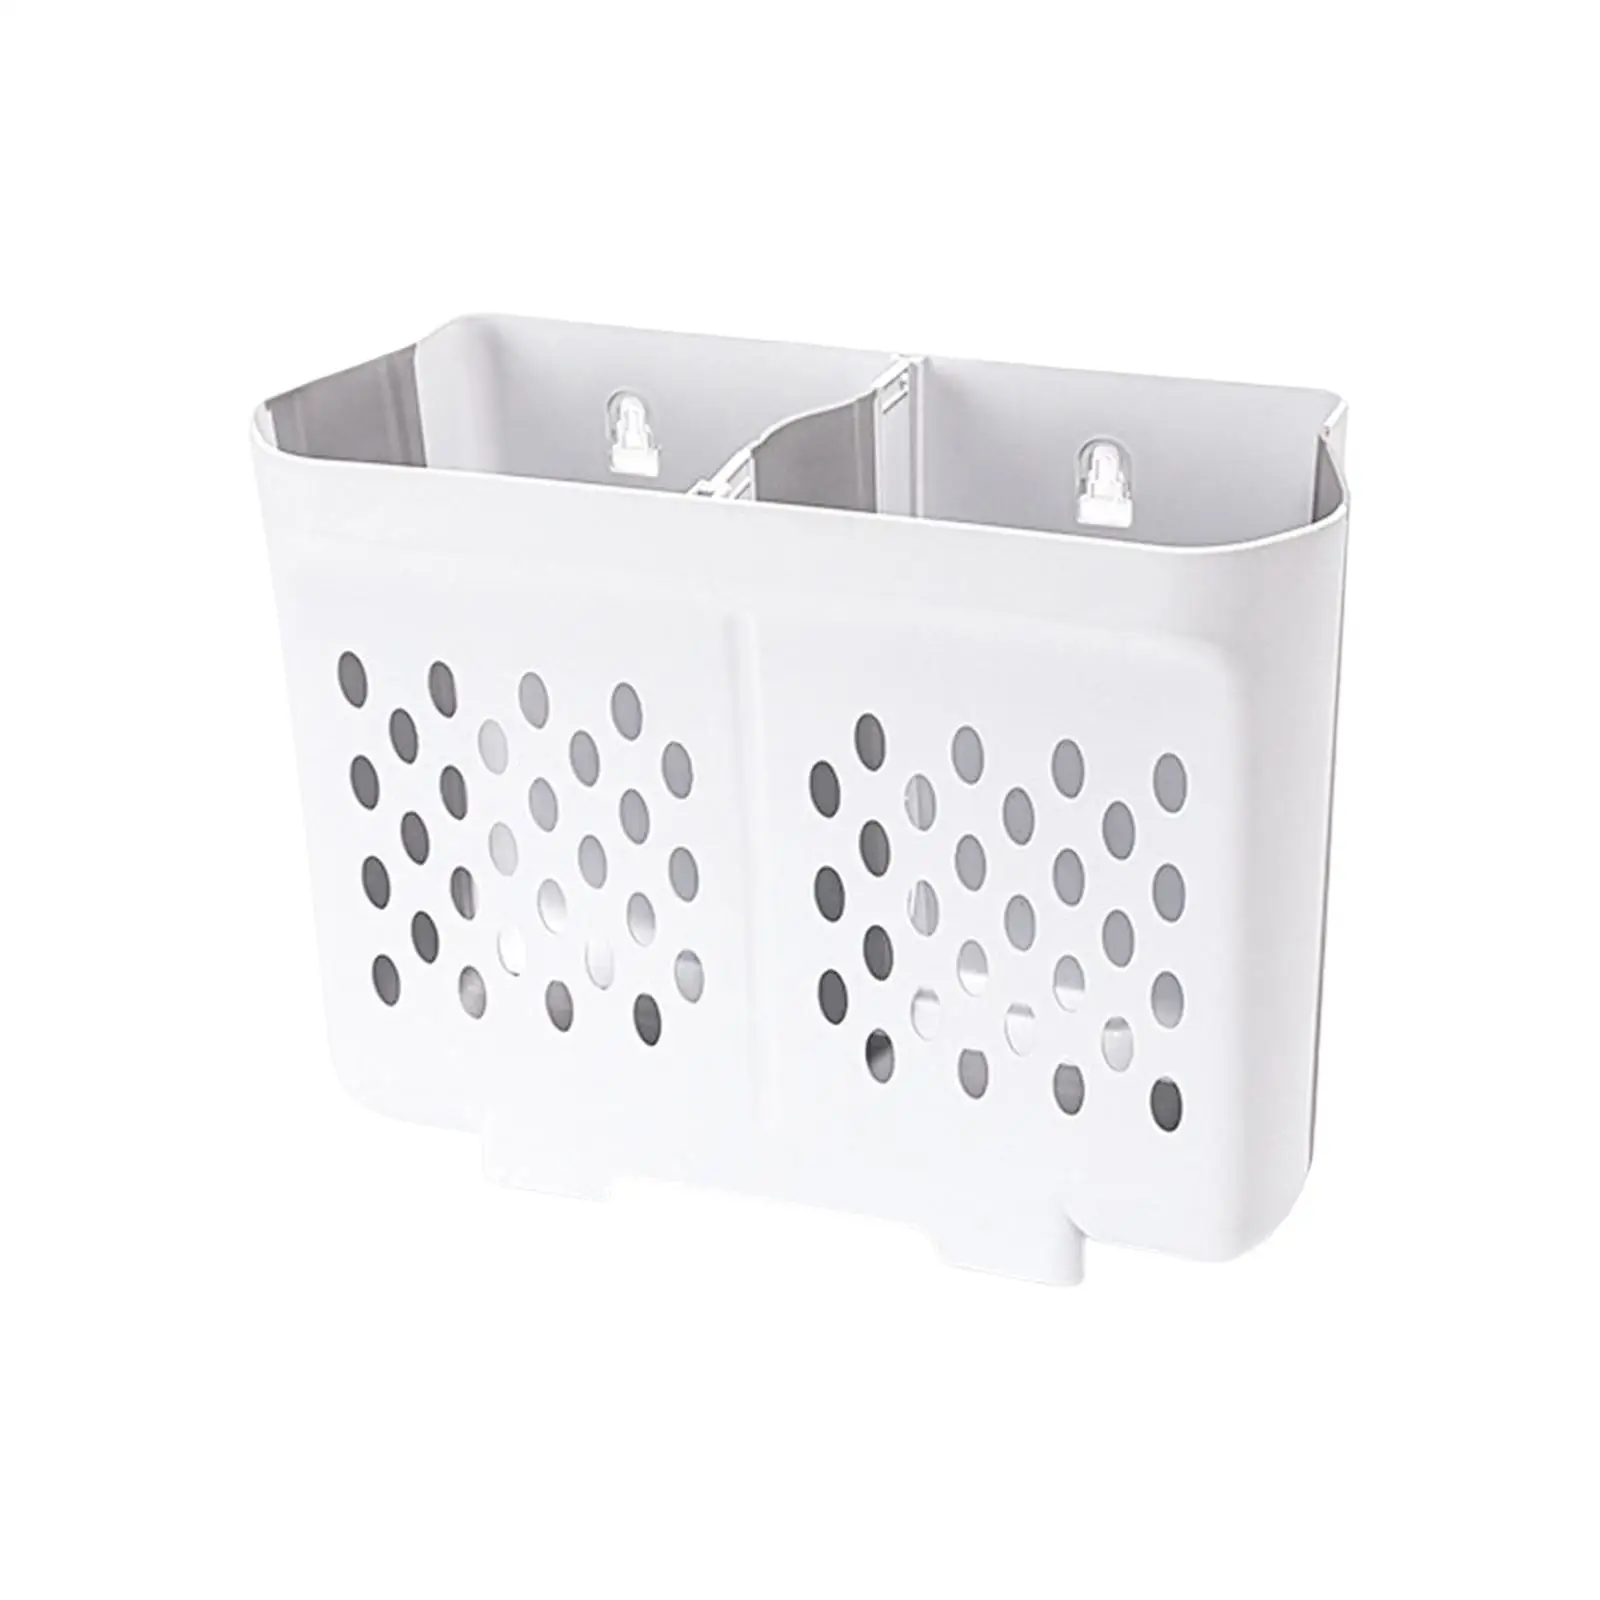 Portable Folding Dirty Clothes Hamper Container Wall Mount Hollow Design Sturdy Punching Free